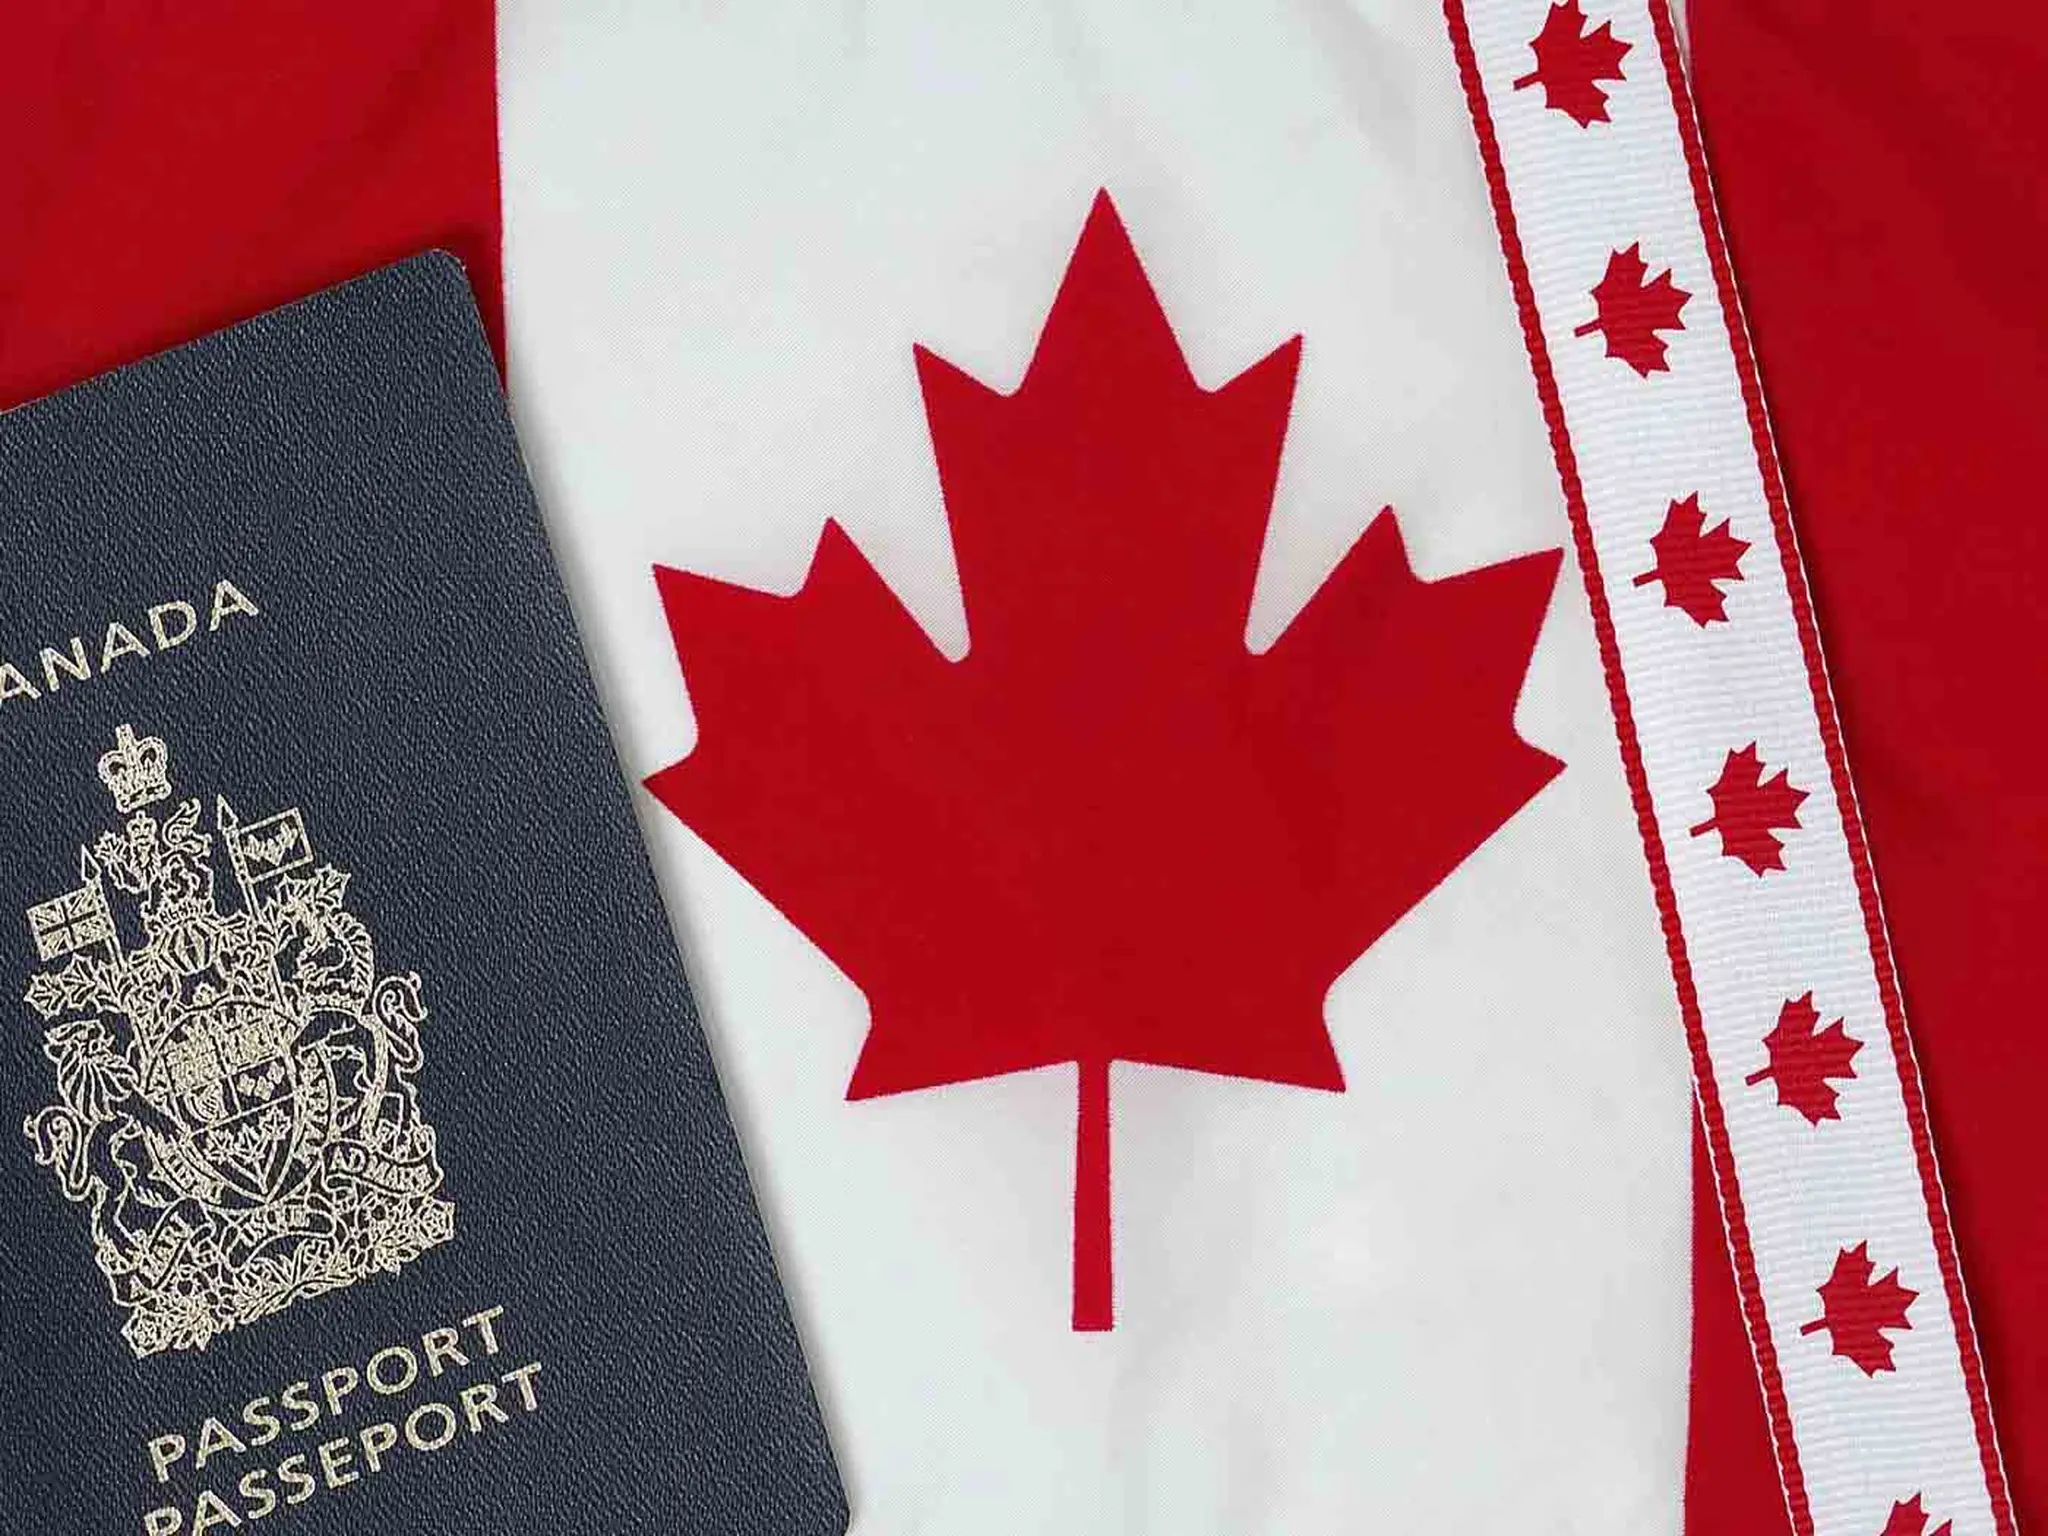 Canada impose new visa restrictions and restrictions on foreign workers